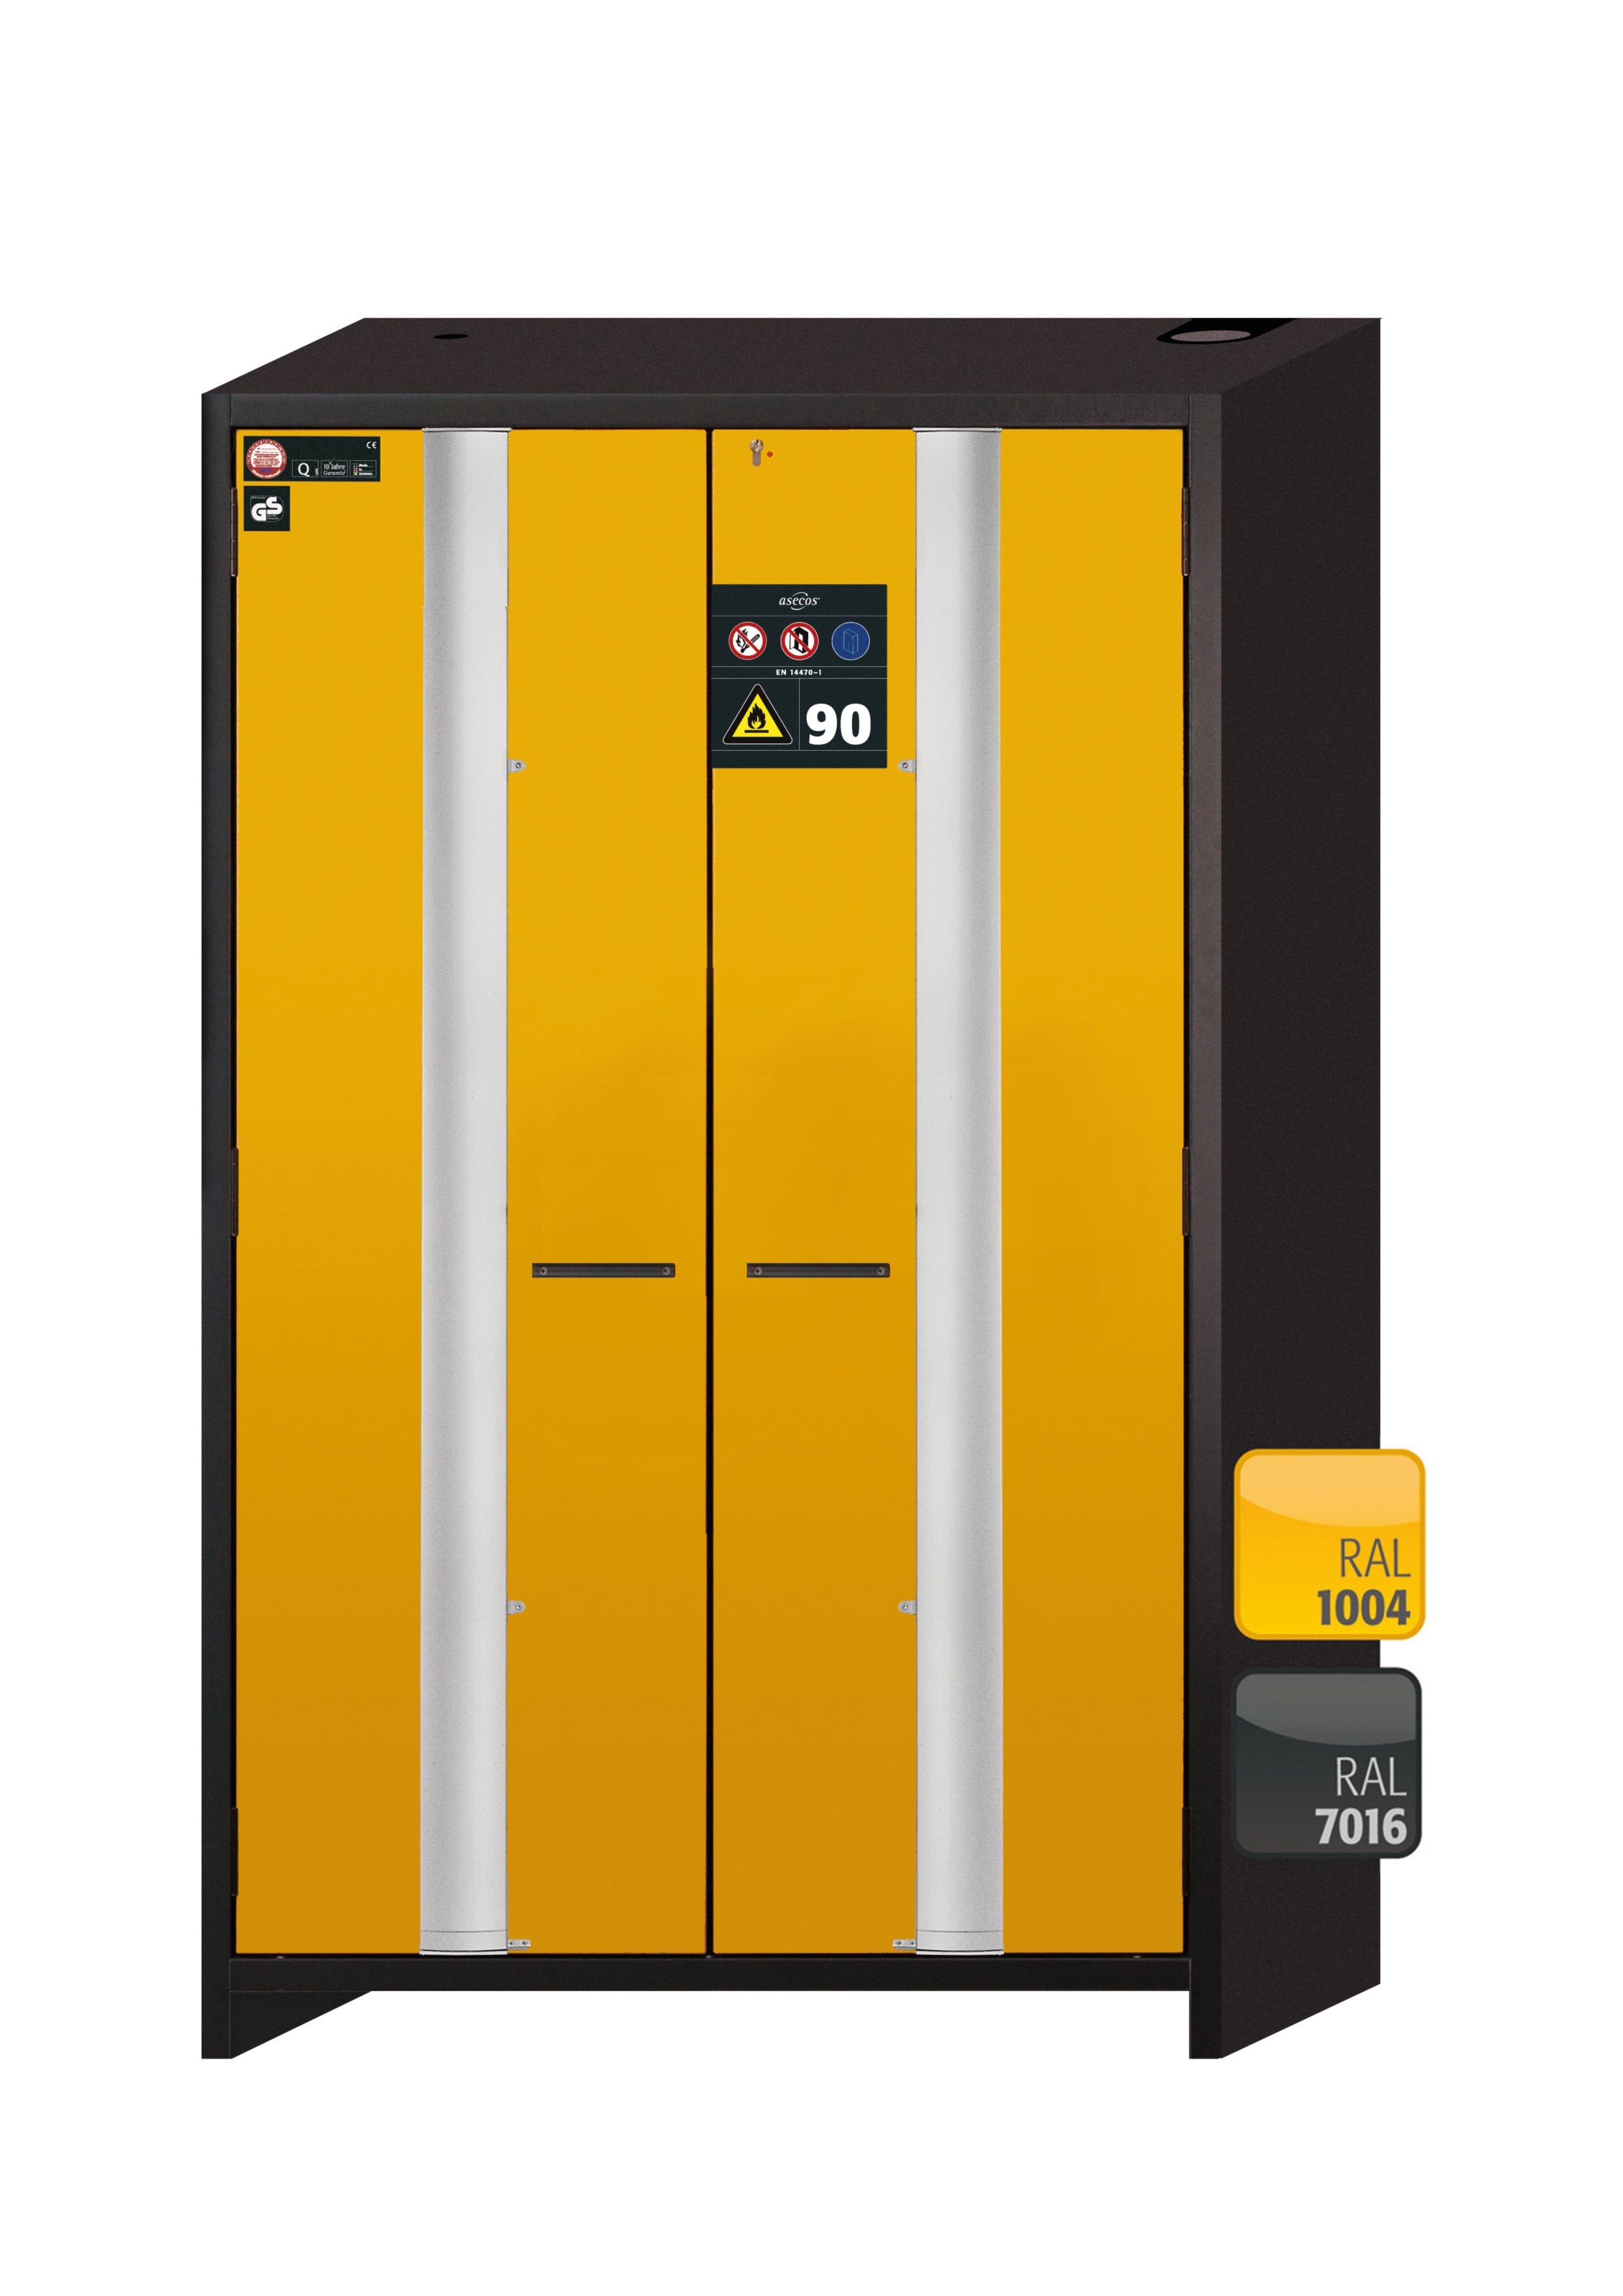 Type 90 safety cabinet Q-PHOENIX-90 model Q90.195.120.FD in safety yellow RAL 1004 with 4x standard pull-out tray (stainless steel 1.4301)